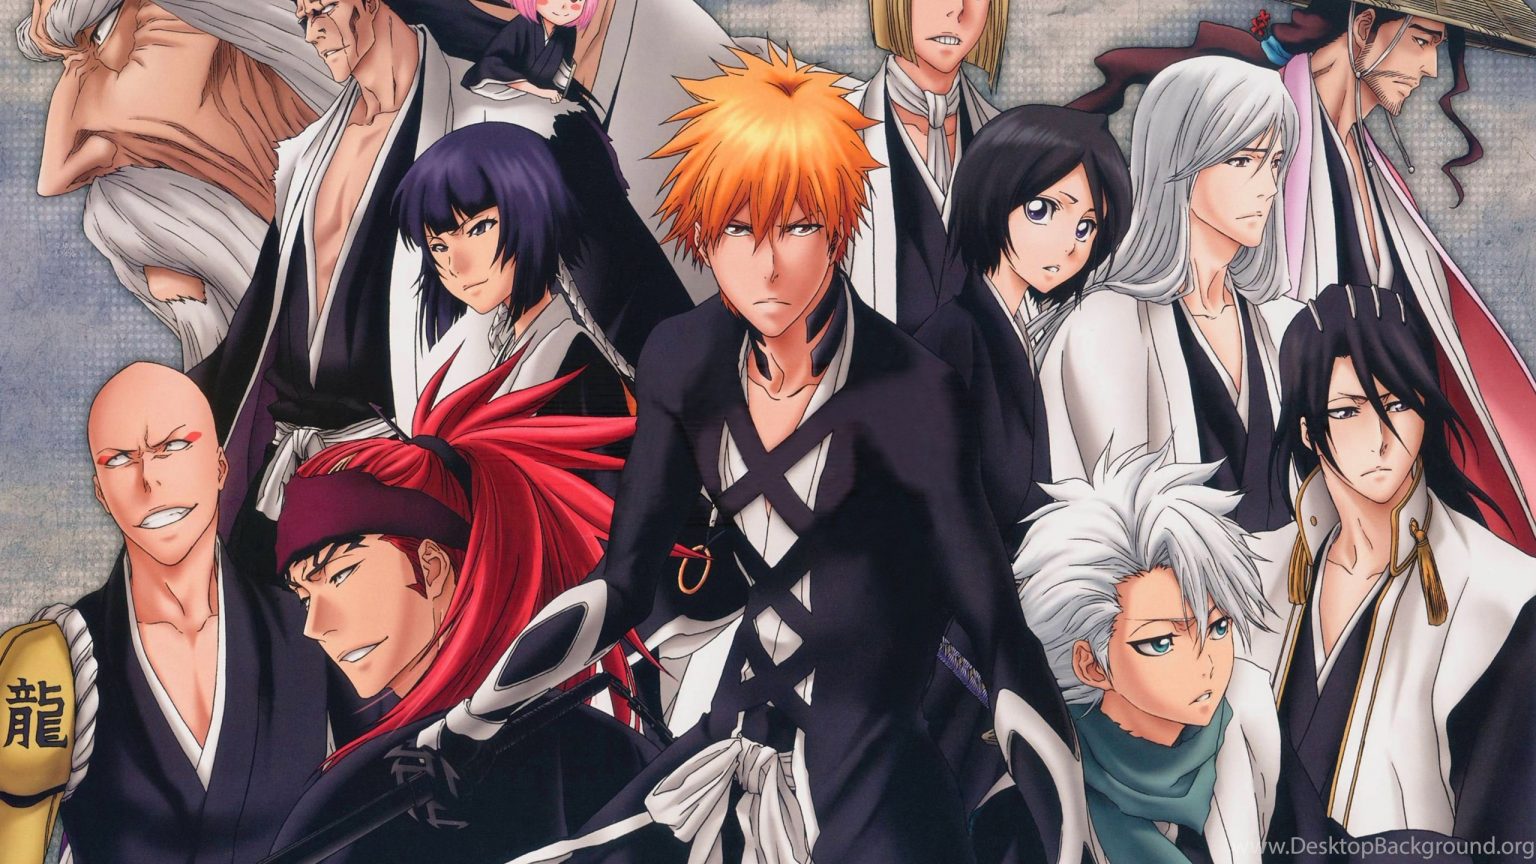 Bleach Thousand Year Blood War Arc Anime: Release Date, Time, Spoilers - How Long Is The Thousand Year Blood War Arc